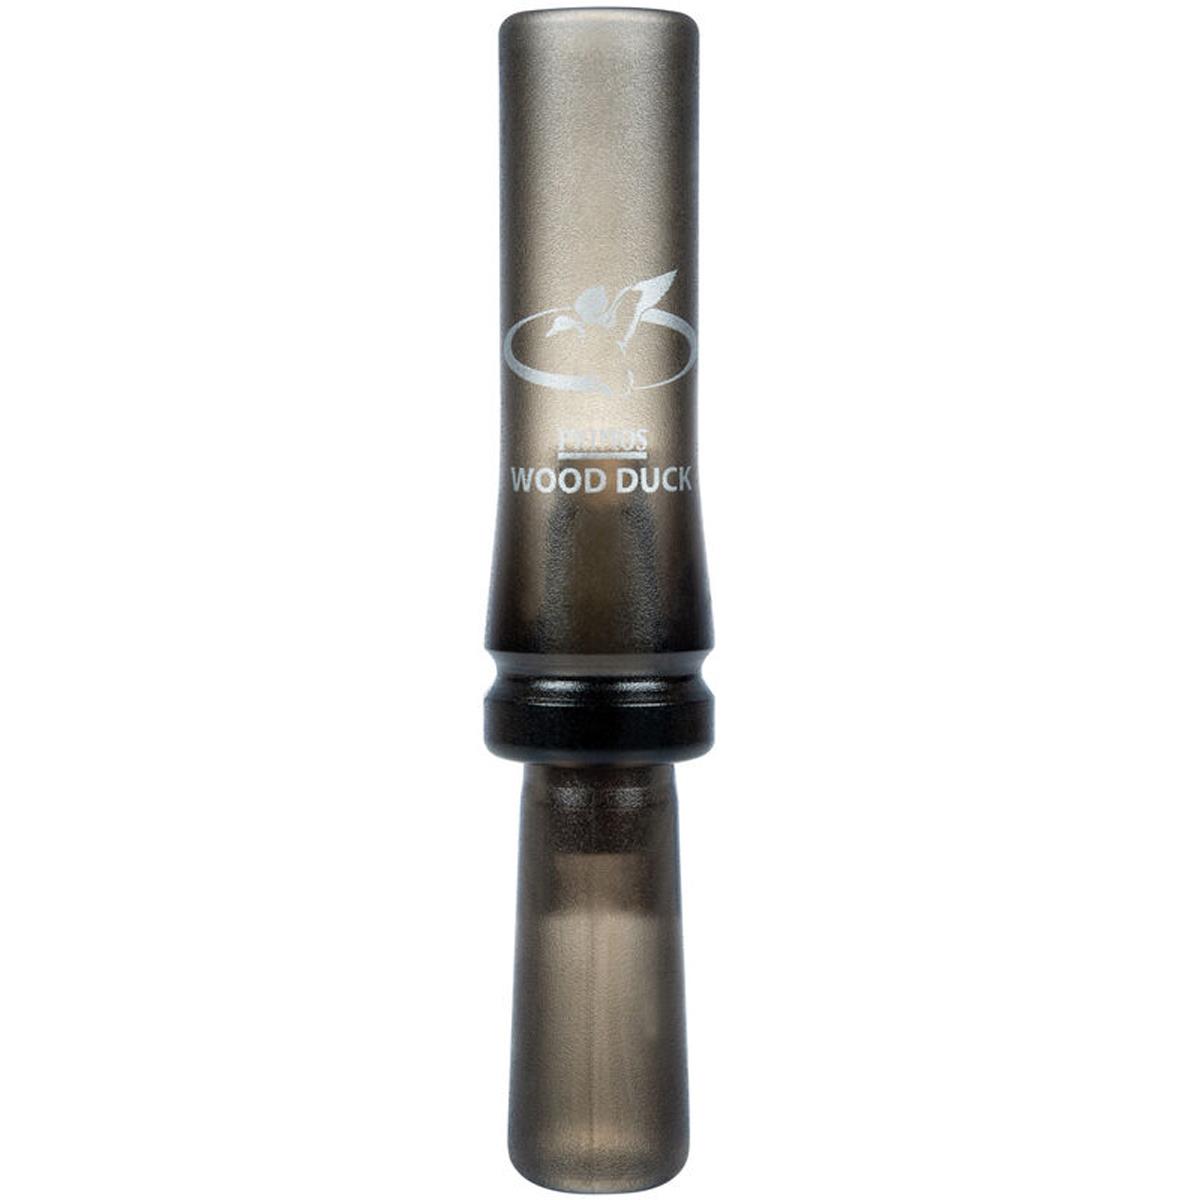 Image of Bushnell Wood Duck Call